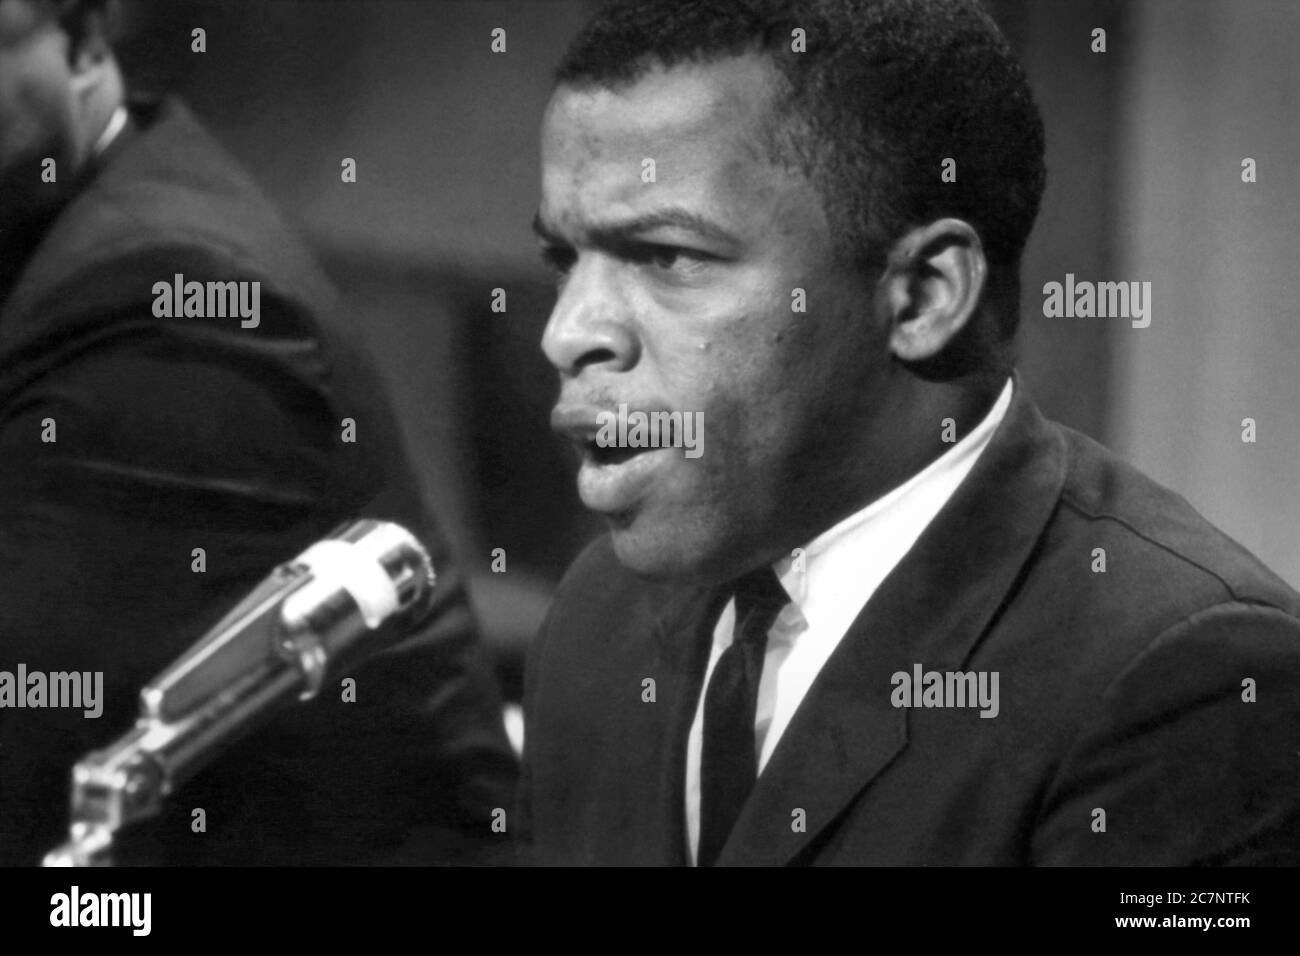 John Lewis (1940-2020), American Civil Rights Movement leader, speaking at a meeting of the American Society of Newspaper Editors at the Statler Hilton Hotel in Washington, D.C. on April 16, 1964. Stock Photo